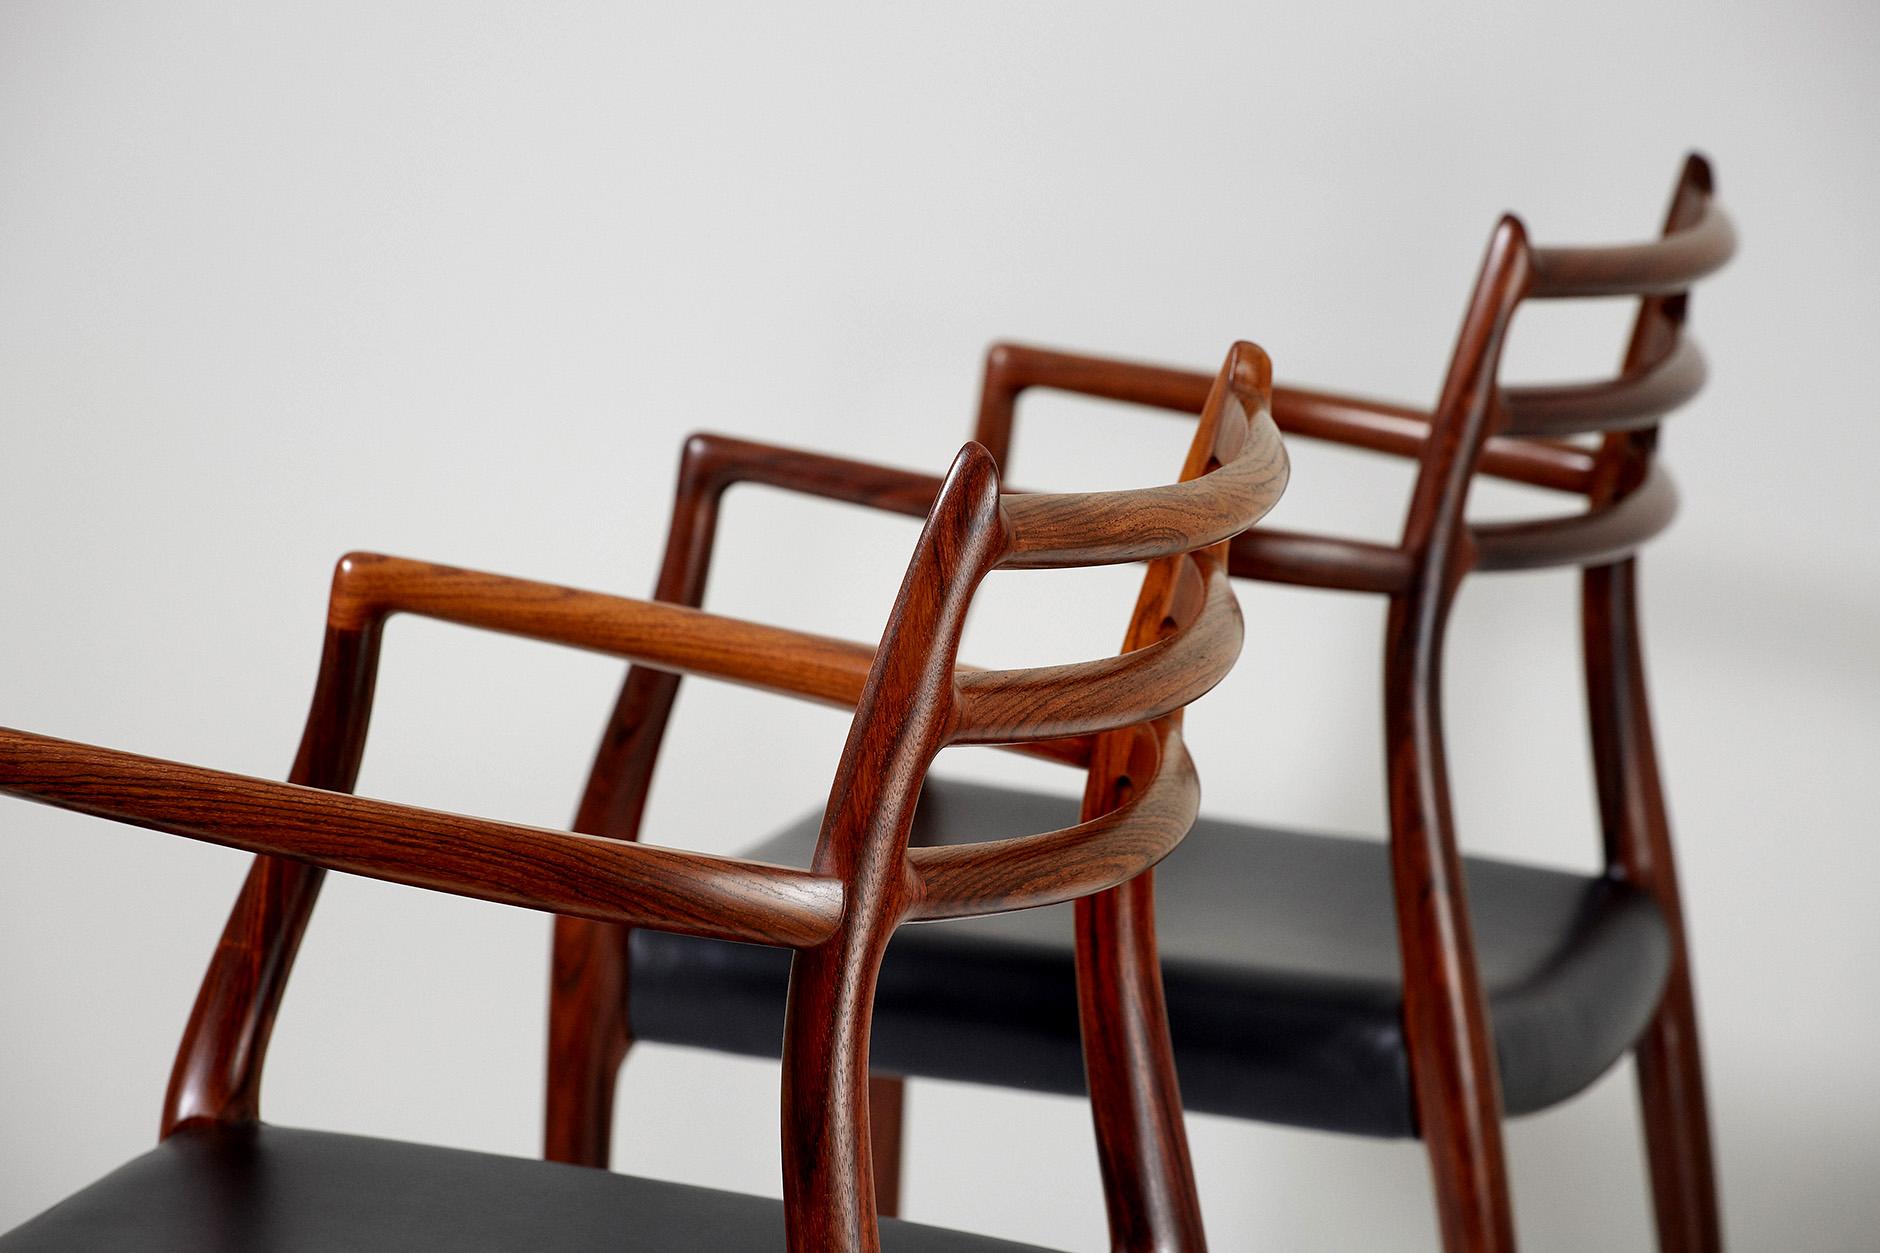 Scandinavian Modern Pair of Rosewood Model 62 Armchairs by Niels Moller, 1962 For Sale